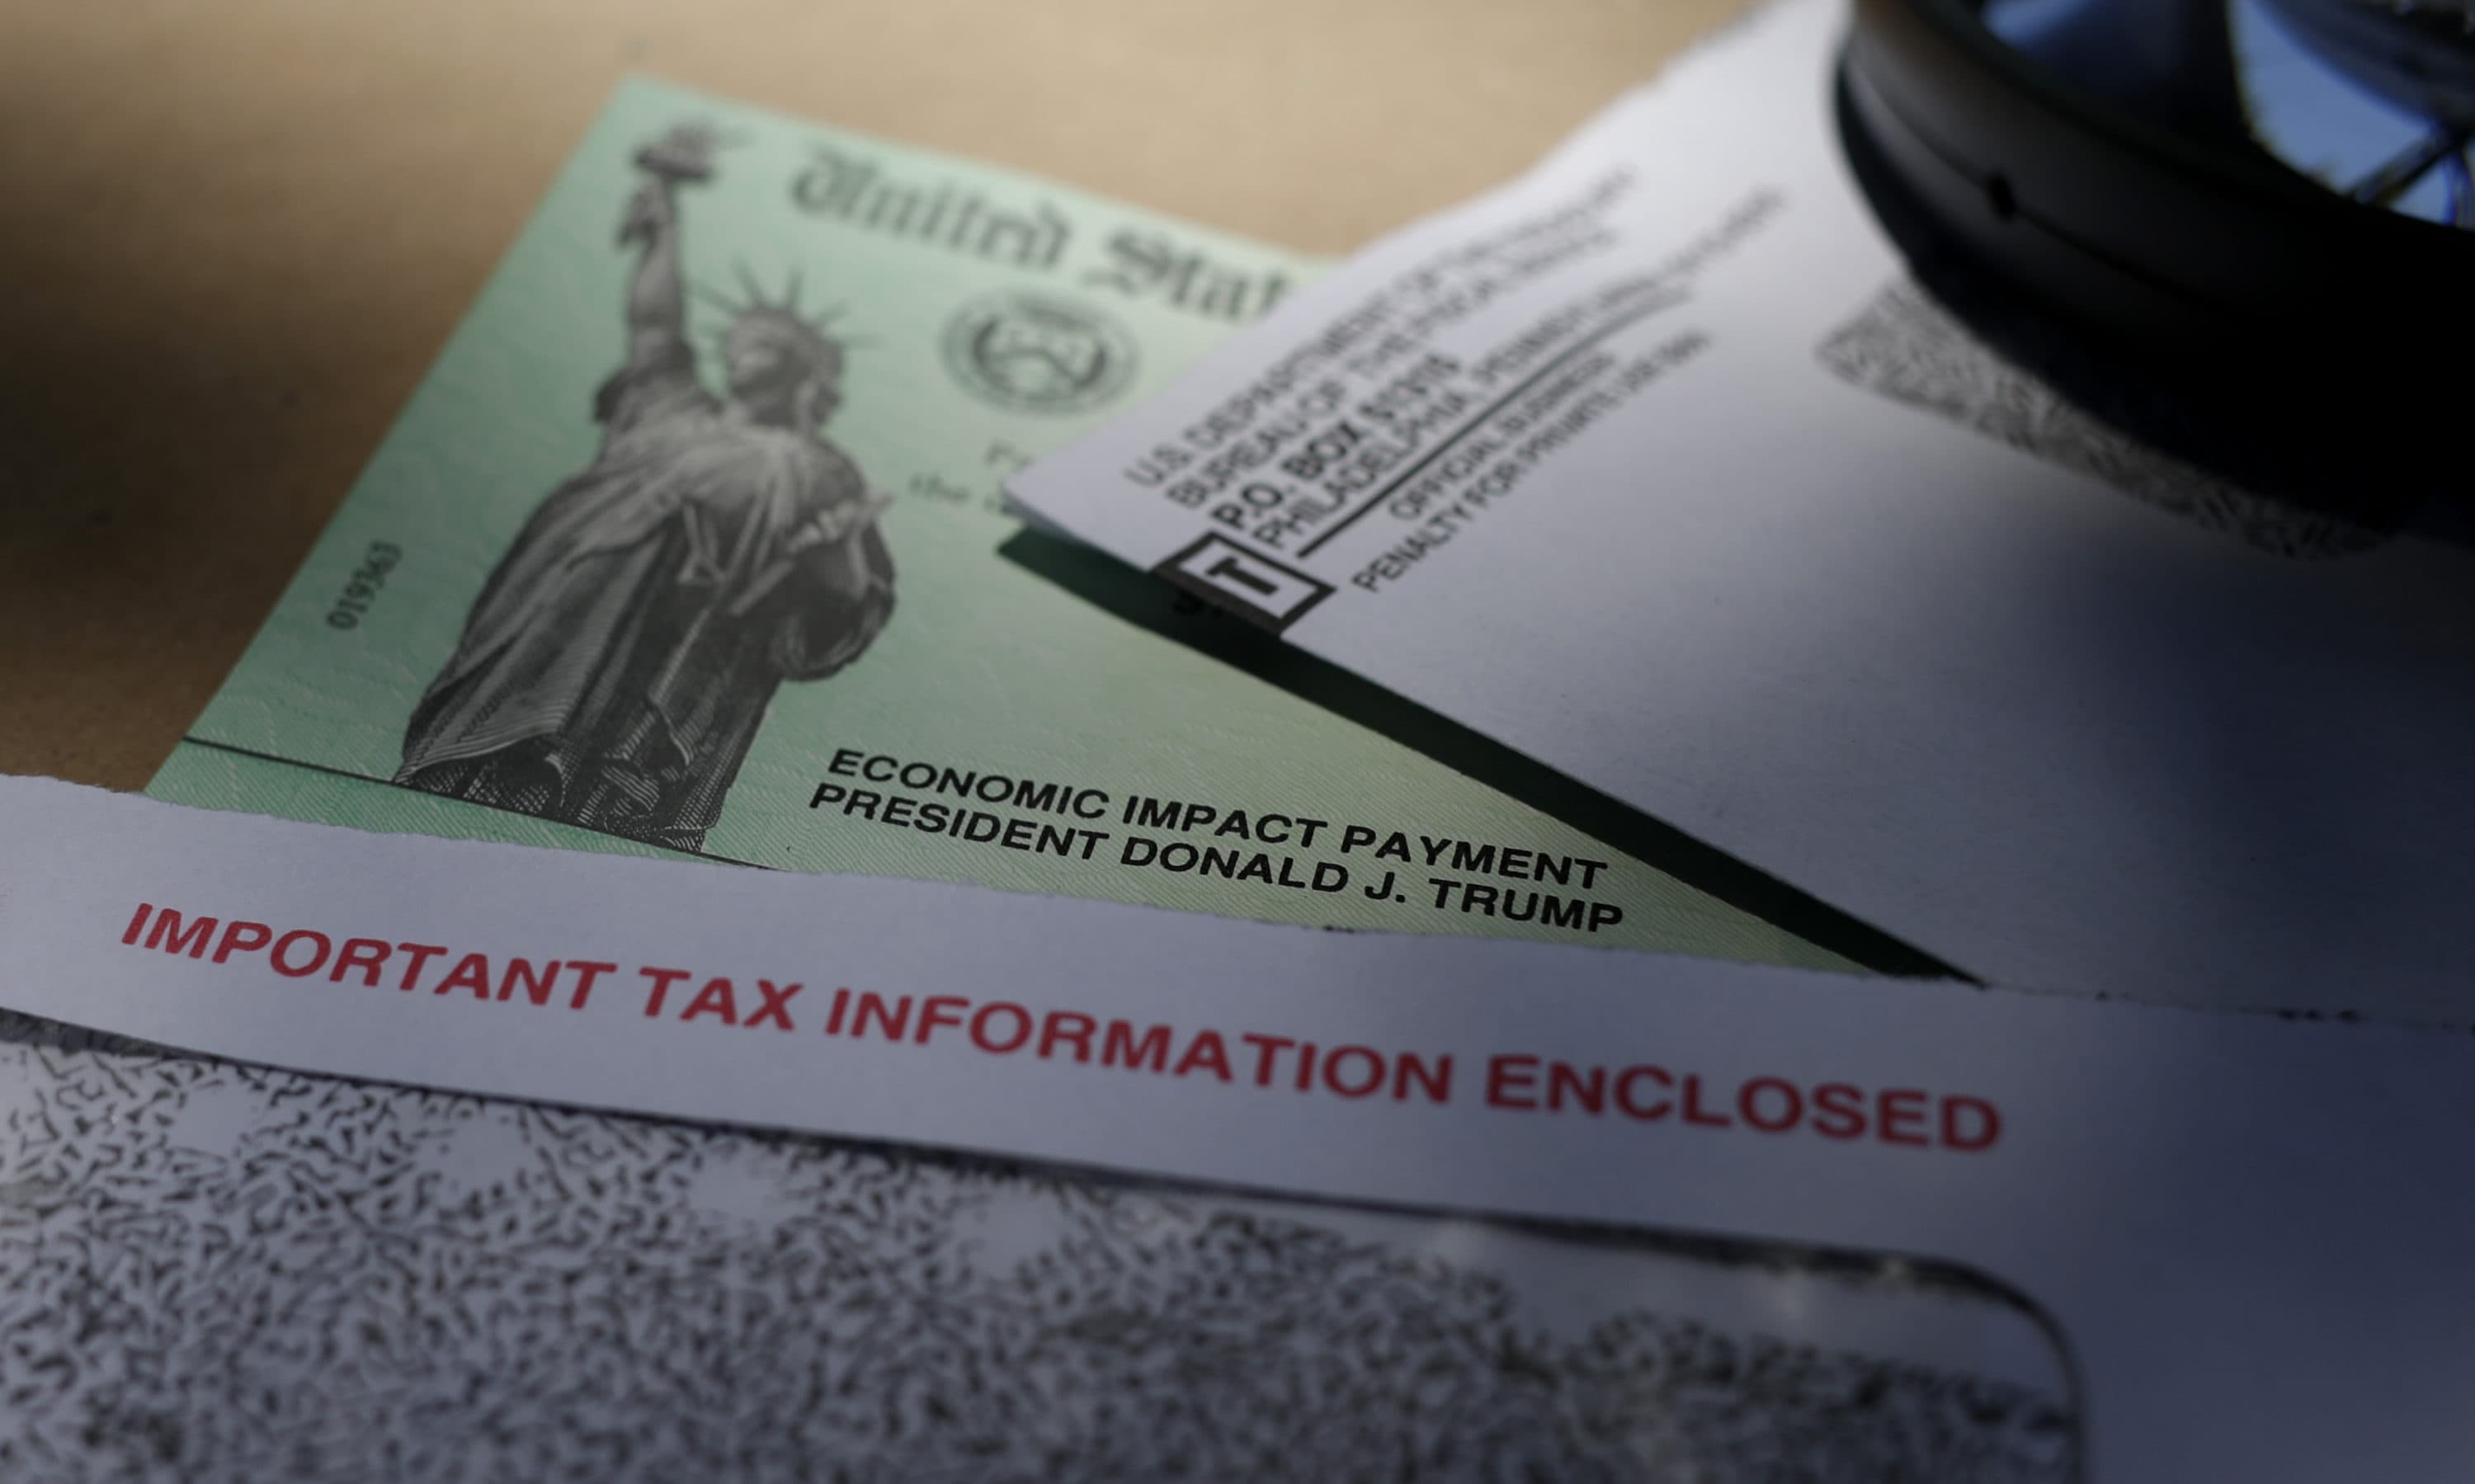 President Donald Trump's name is seen on a stimulus check issued by the IRS to help combat the adverse economic effects of the COVID-19 outbreak, in San Antonio, Thursday, April 23, 2020. According to the Treasury Department, it marks the first time a president's name has appeared on any IRS payments, whether refund checks or other stimulus checks that have been mailed during past economic crises. (AP Photo/Eric Gay)